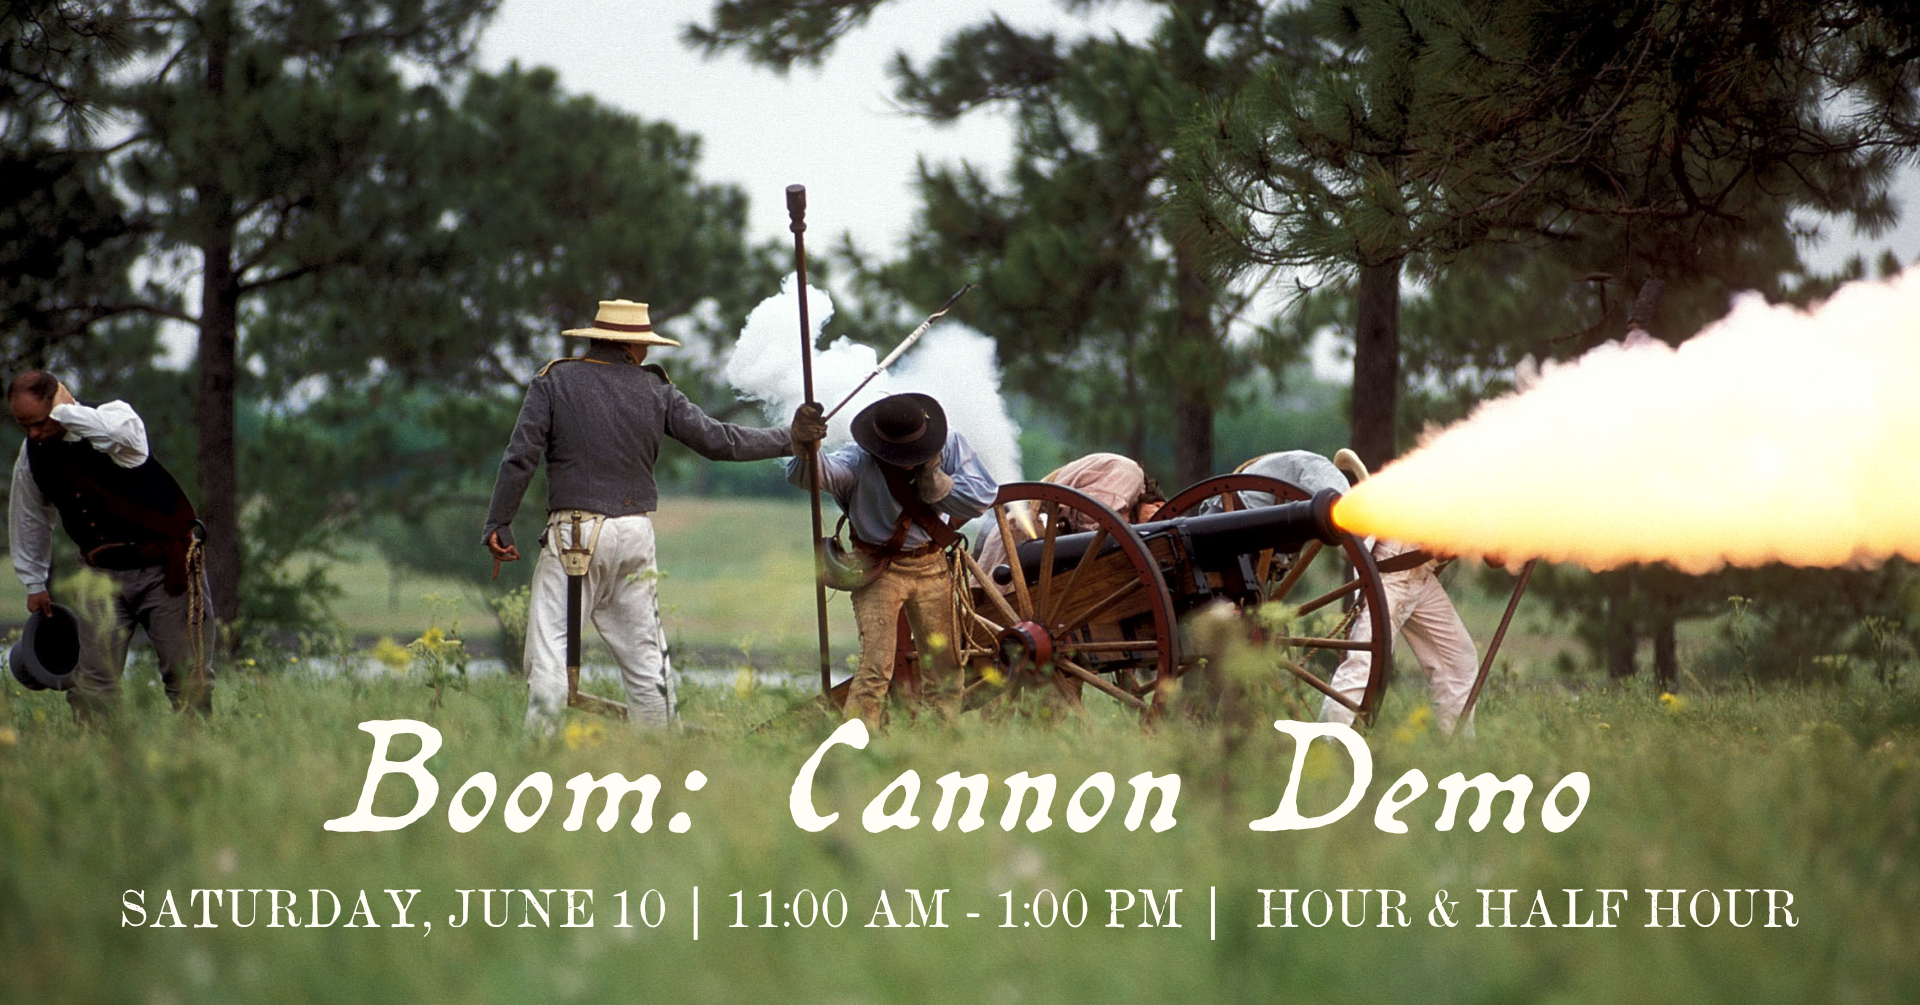 A blast projects from a cannon, with a cannon crew of five men.